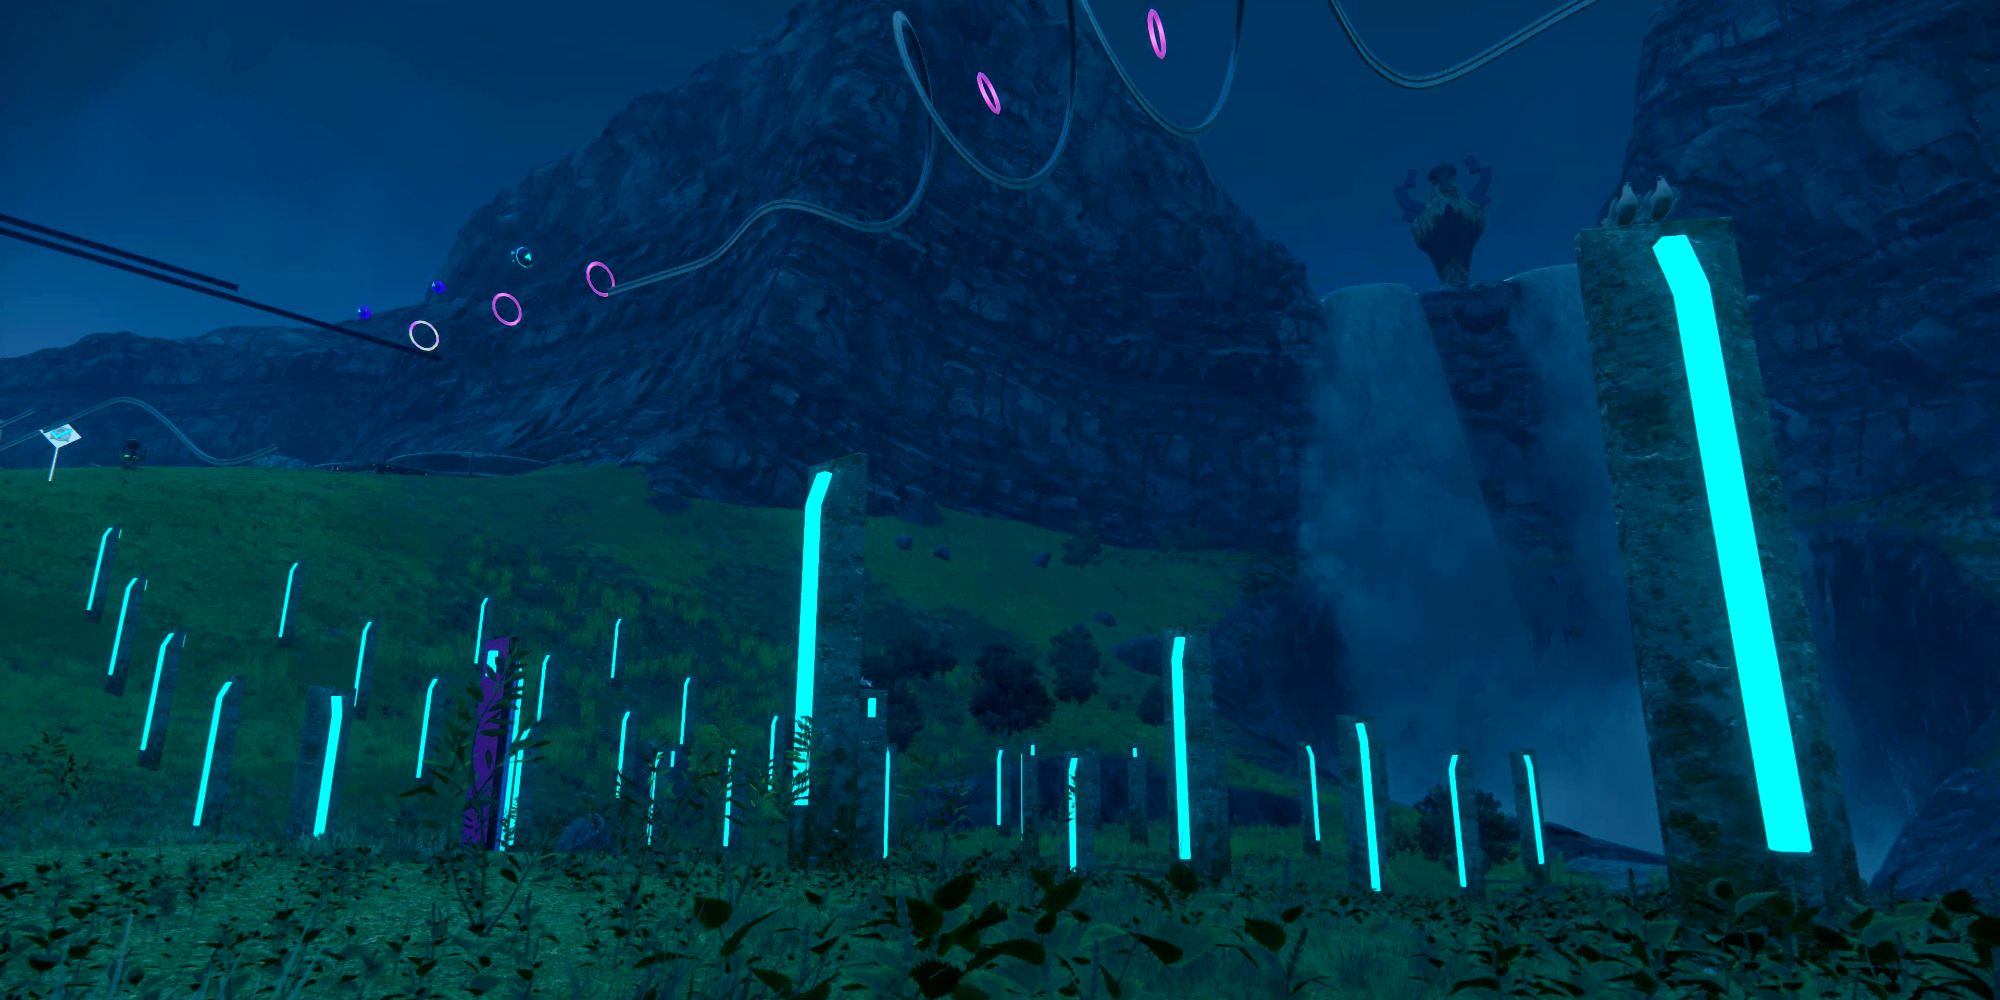 In the night, stone monuments scattered along the valleys of Kronos Island begin to glow with a soft cyan light.